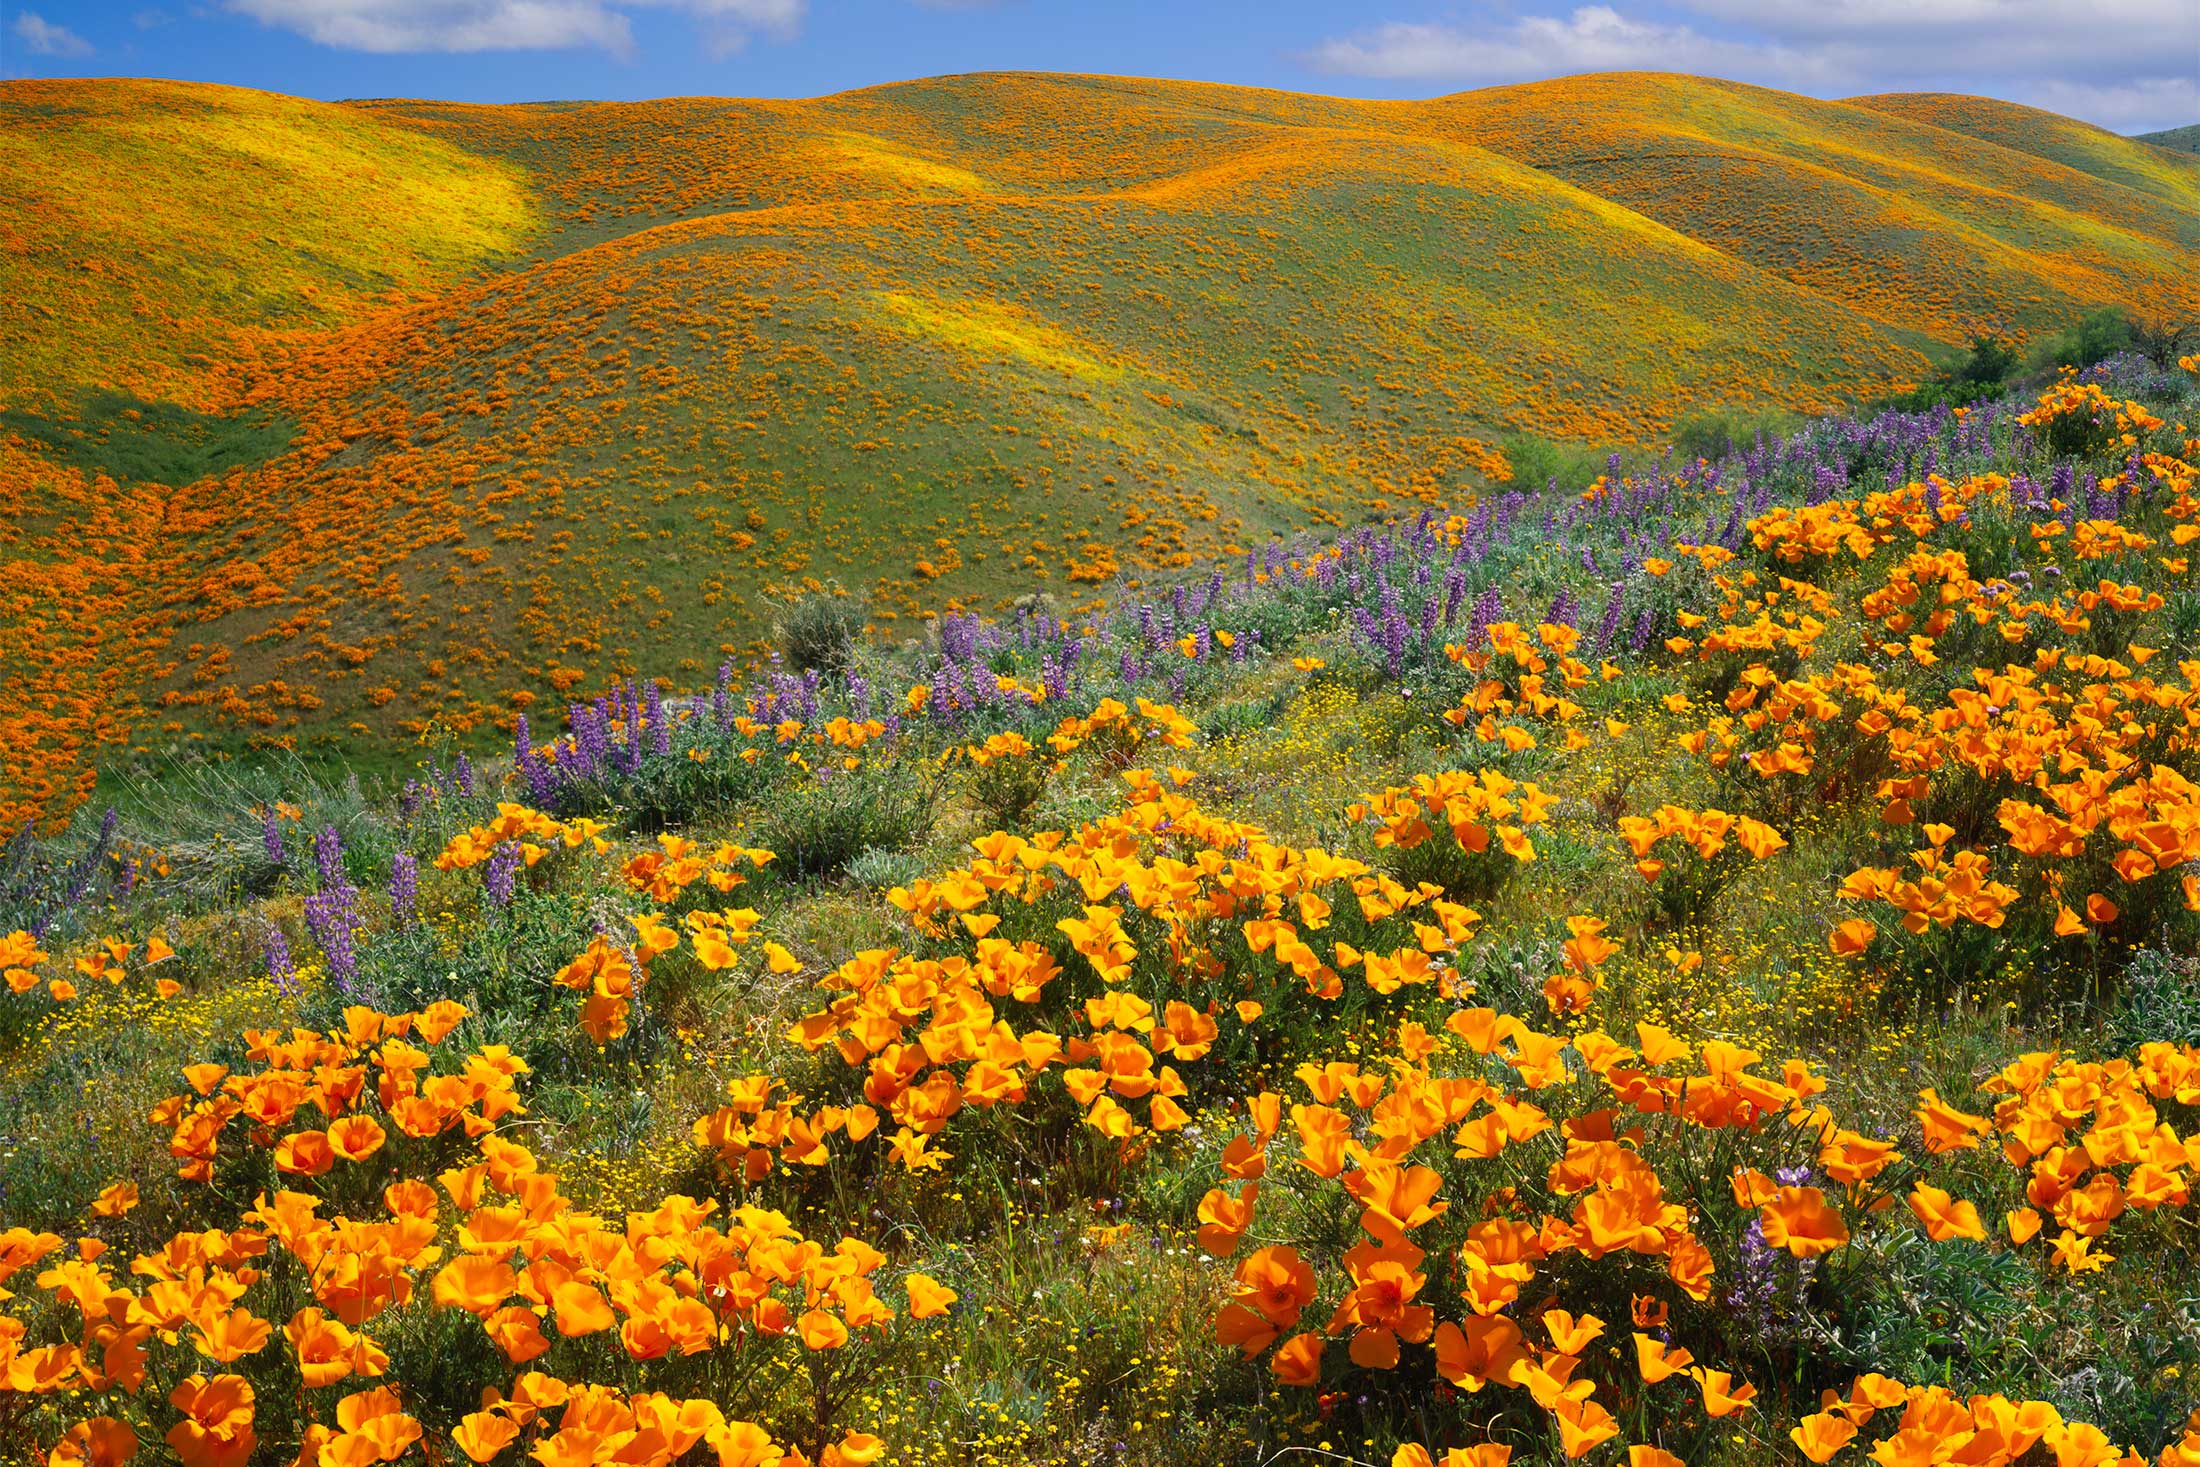 photo - Golden Poppies Covering Hills